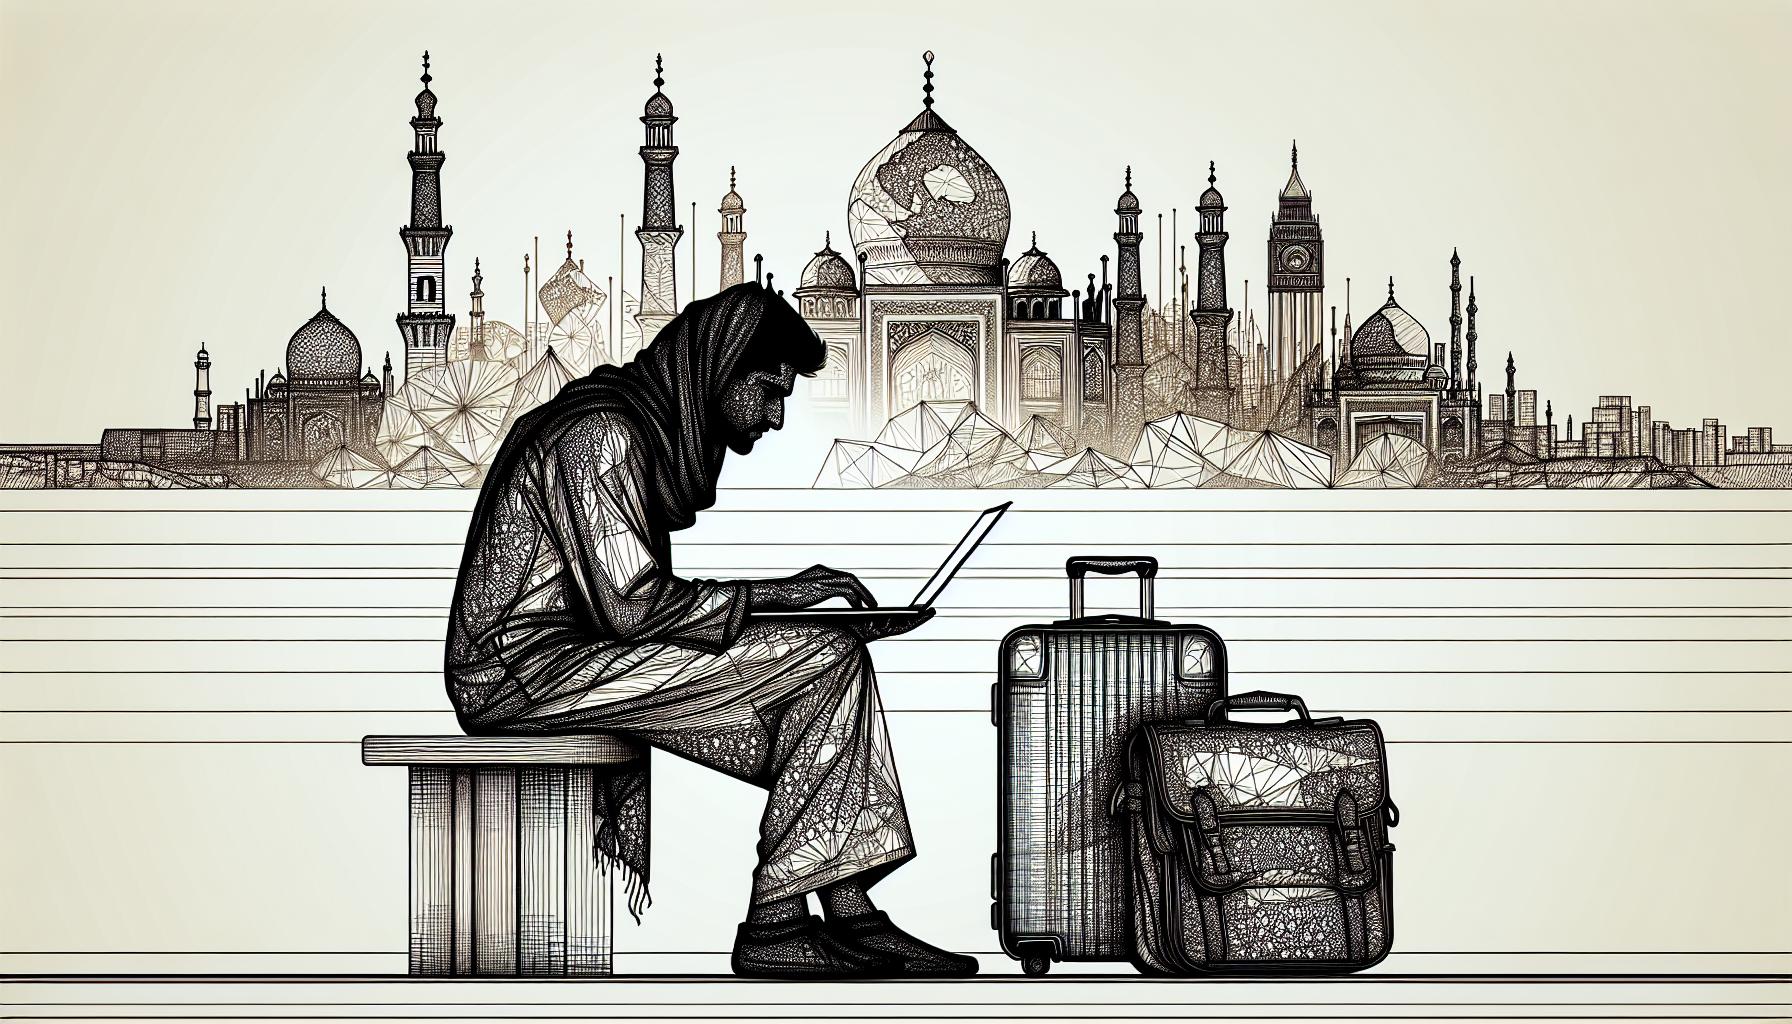 Visas Is It Legal To Be A Digital Nomad? ReallyRemoteWorker Unravel the complexities of becoming a digital nomad as this article dives into the legal challenges and benefits. Armed with tips to navigate regulations, border control and keep your nomad lifestyle thriving, explore how digital nomads legally maneuver their journey around the globe.